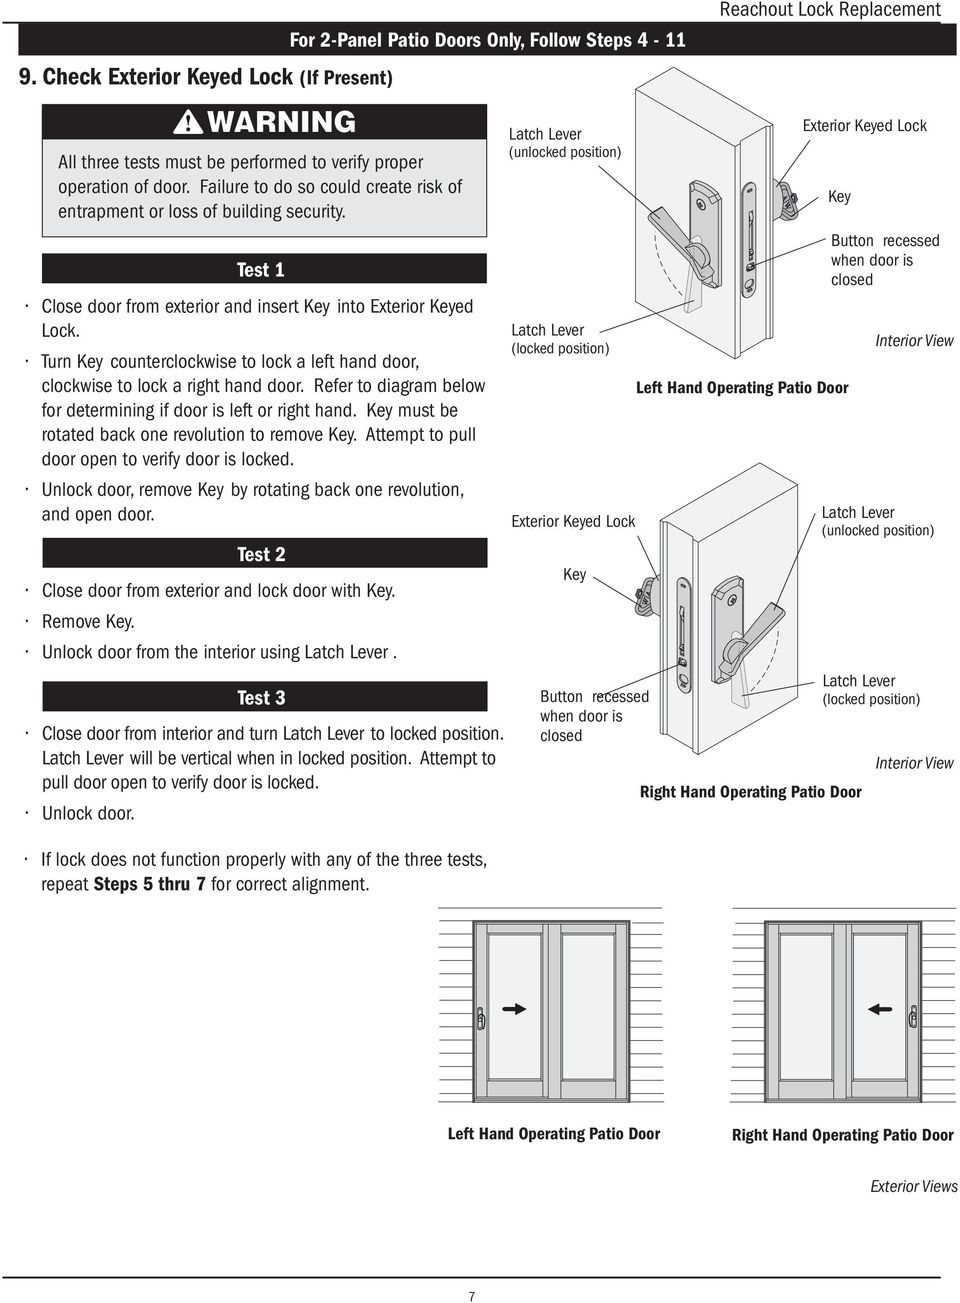 Turn Key counterclockwise to lock a left hand door, clockwise to lock a right hand door. Refer to diagram below for determining if door is left or right hand.